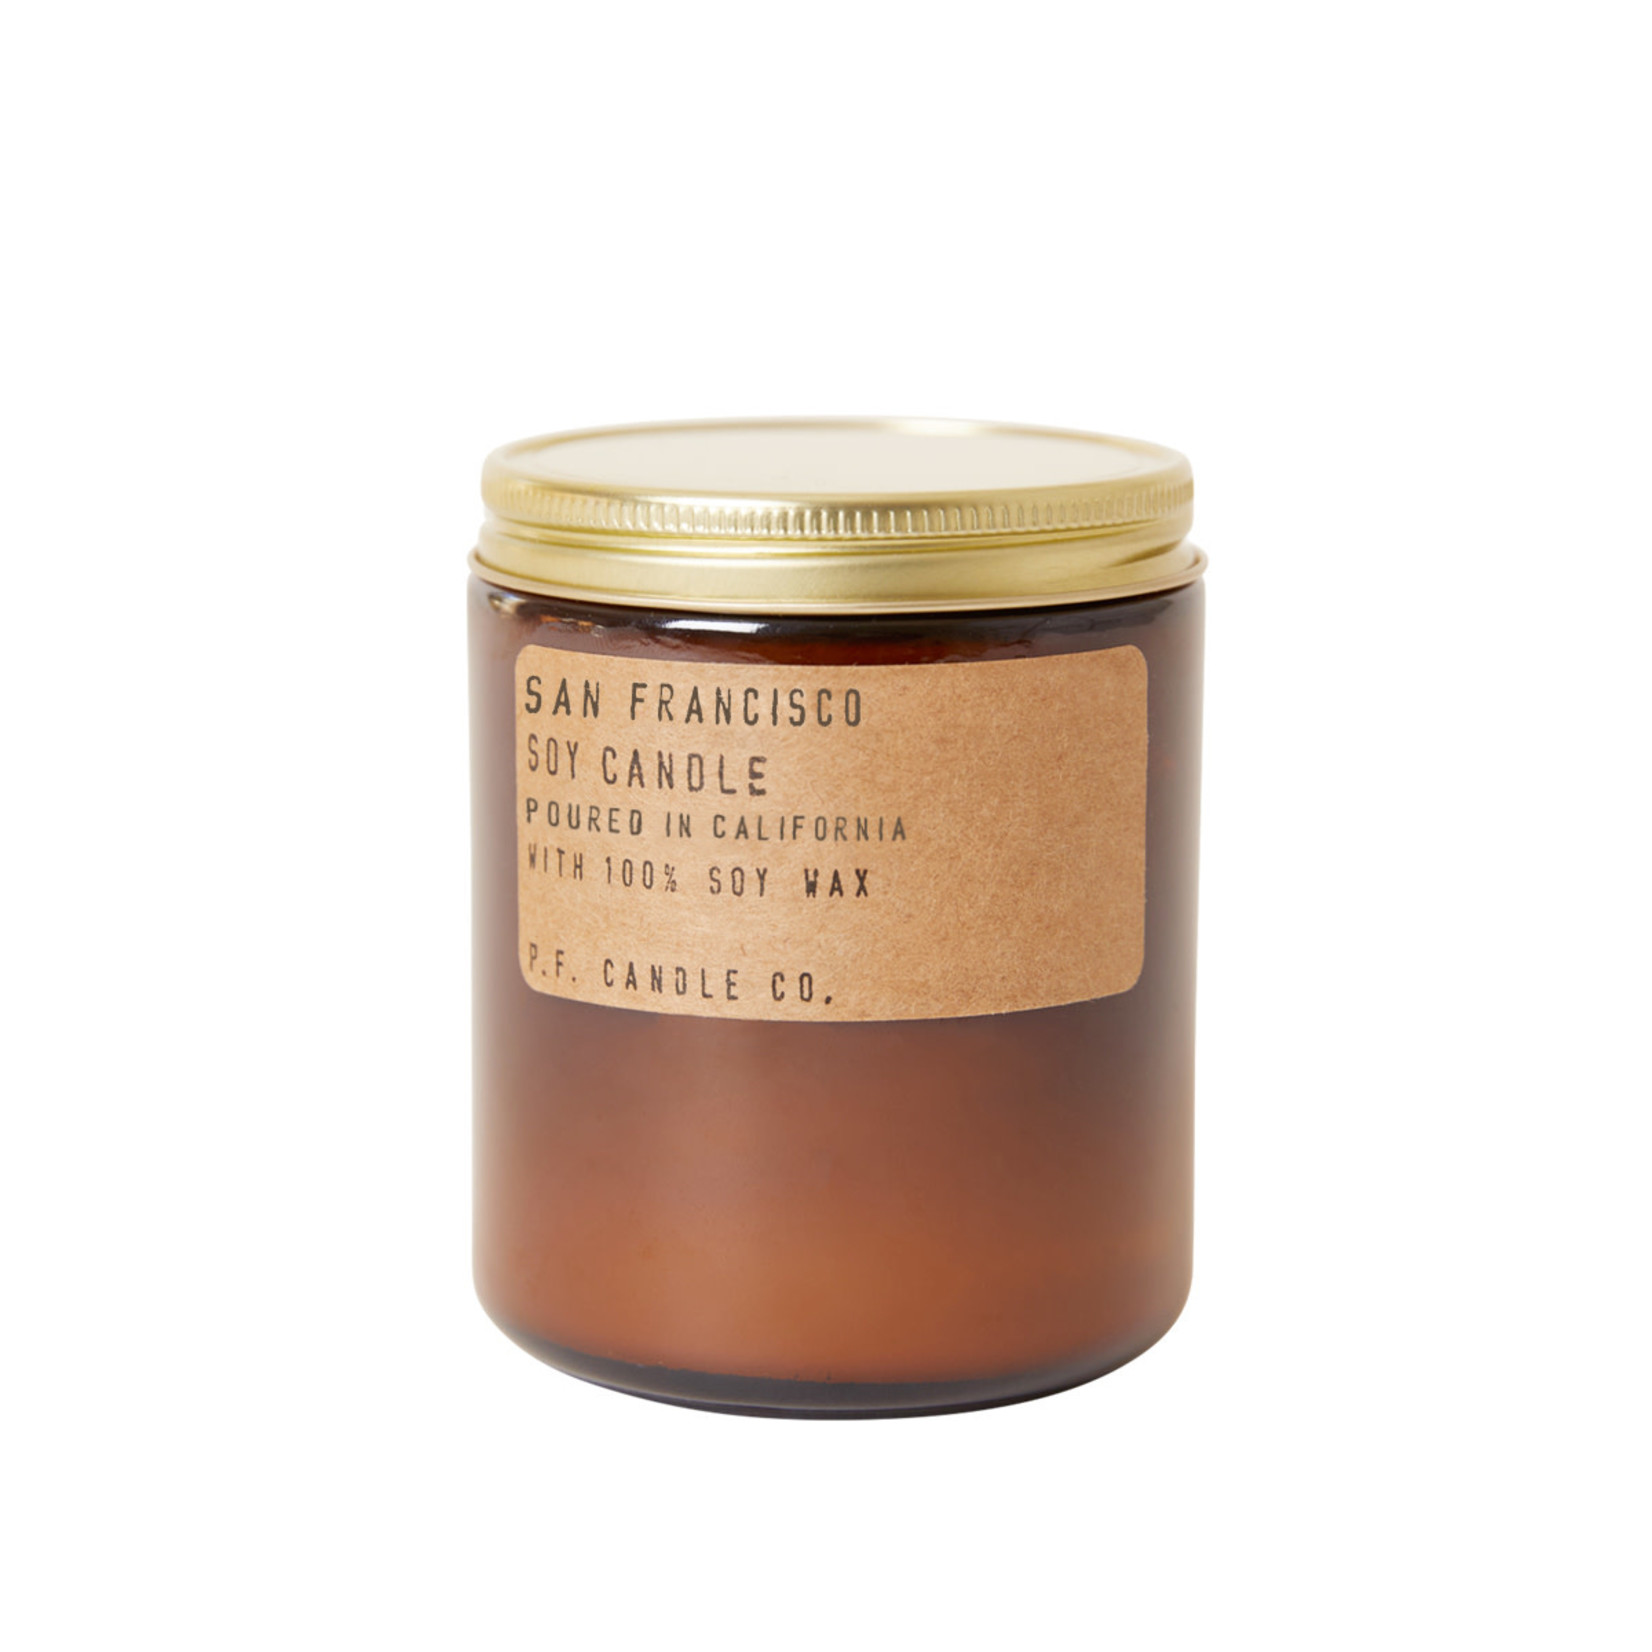 P.F. Candle Co. P.F. Soy Candle 7.2oz San Francisco